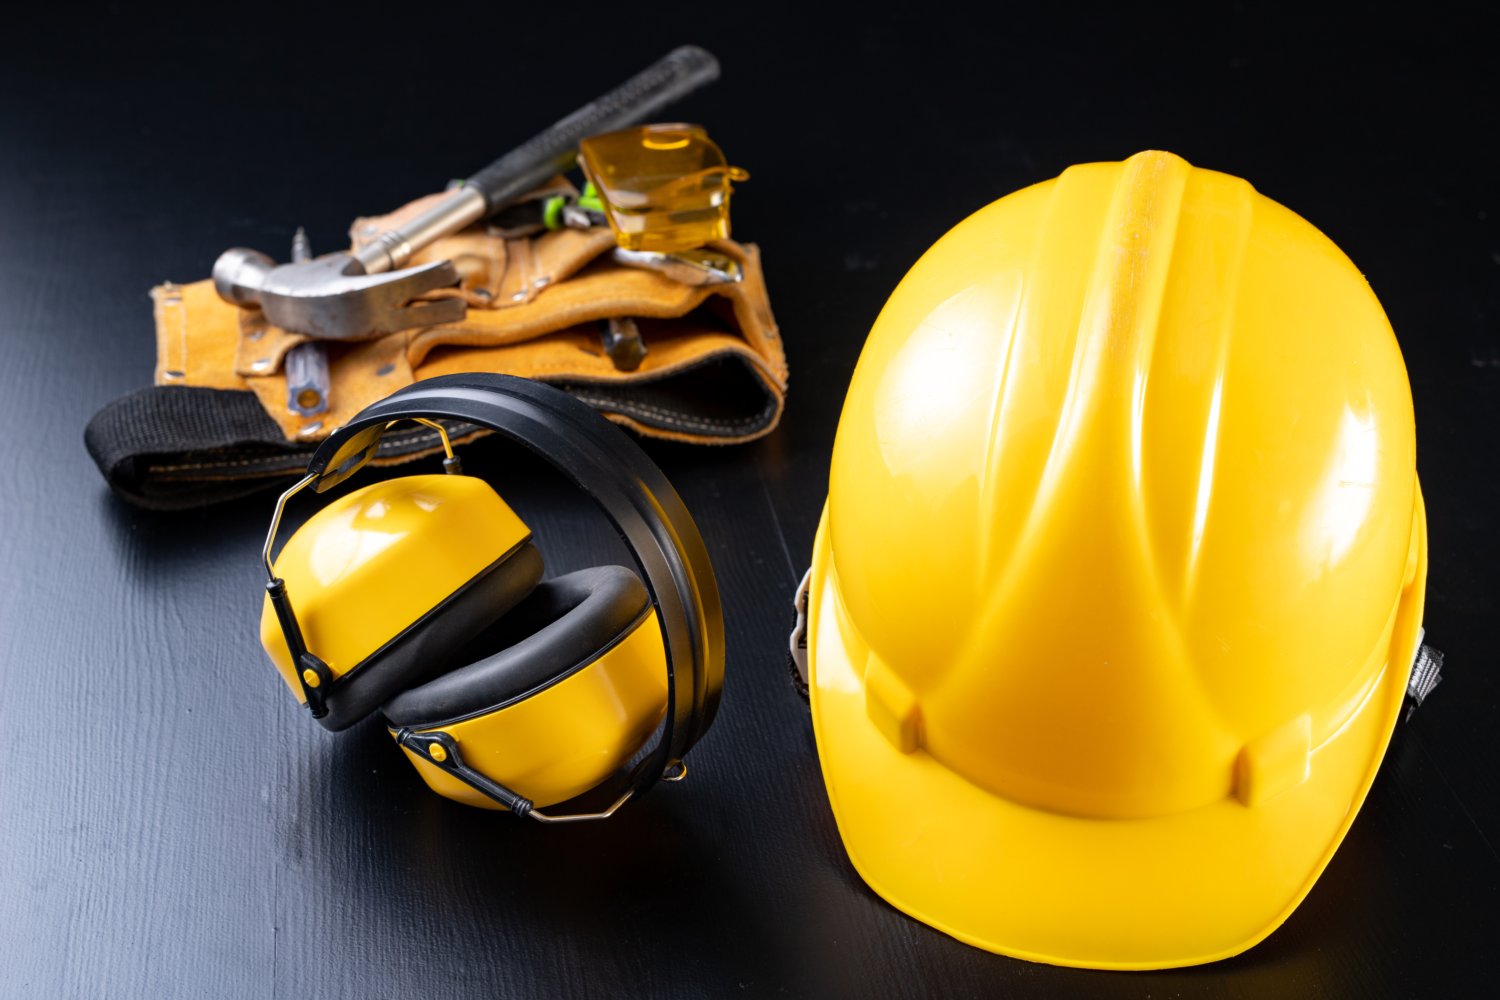 Helmet and accessories for construction workers. Accessories needed for work on the construction site. Dark background.